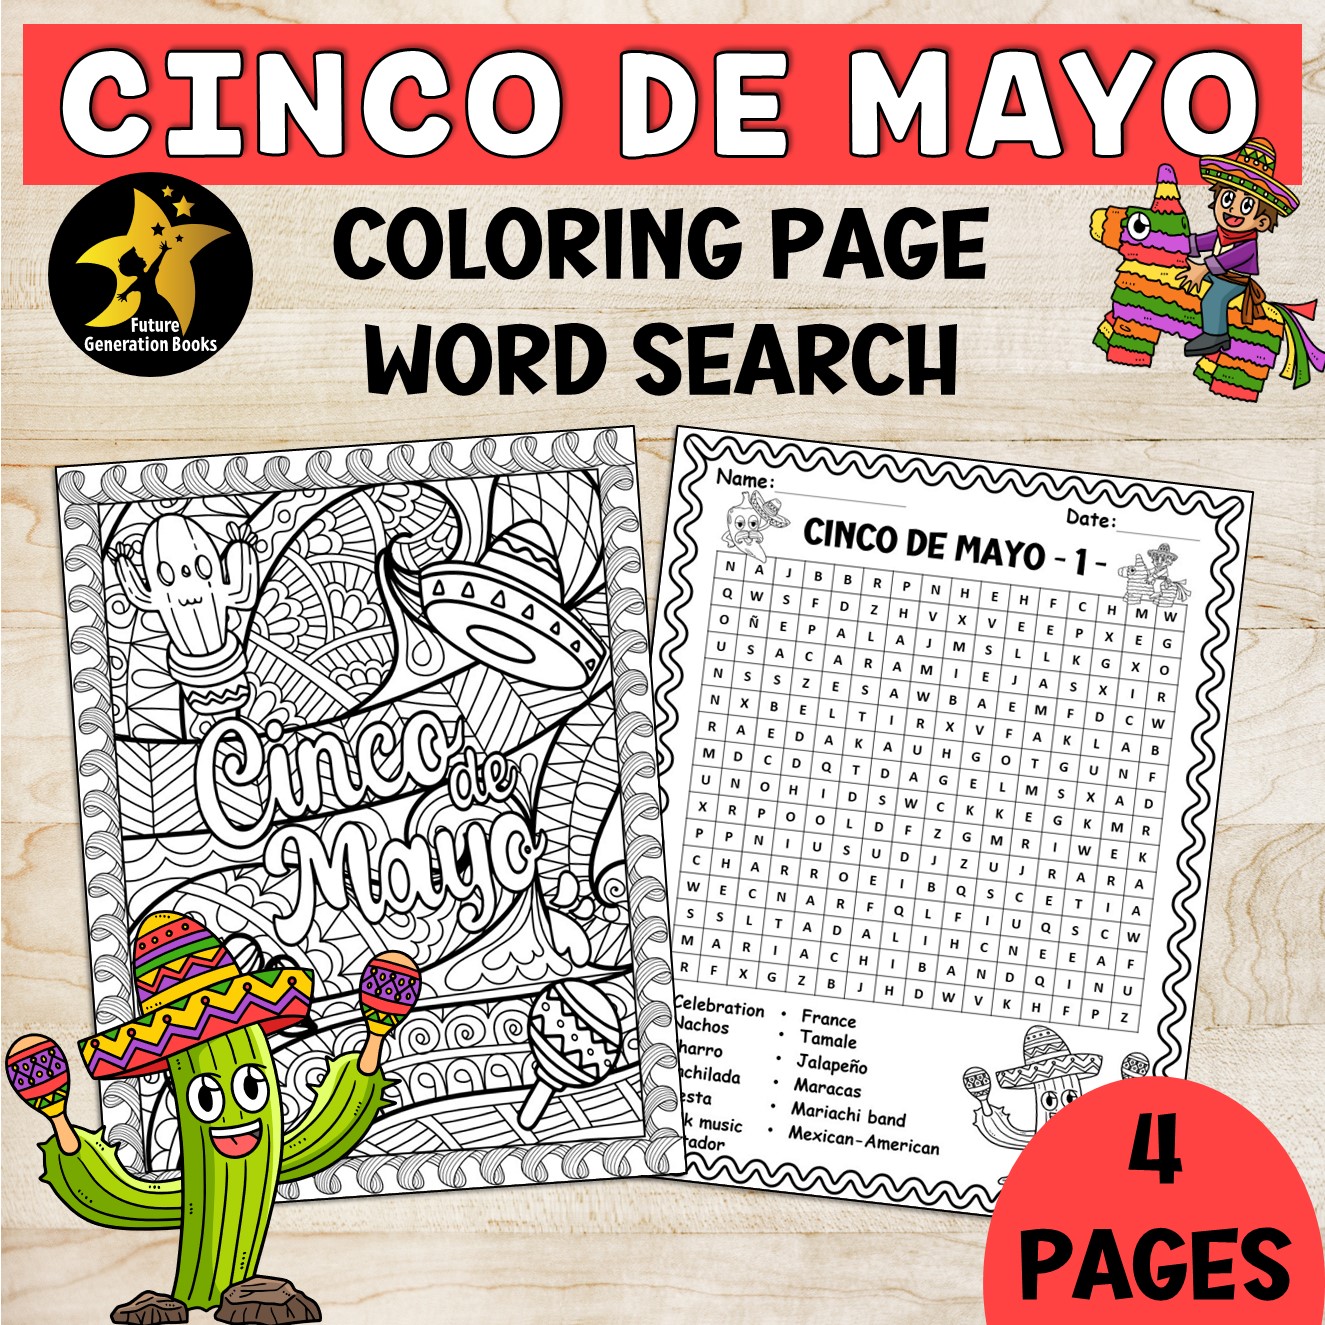 Free cinco de mayo coloring page word search puzzle game worksheets may activity made by teachers